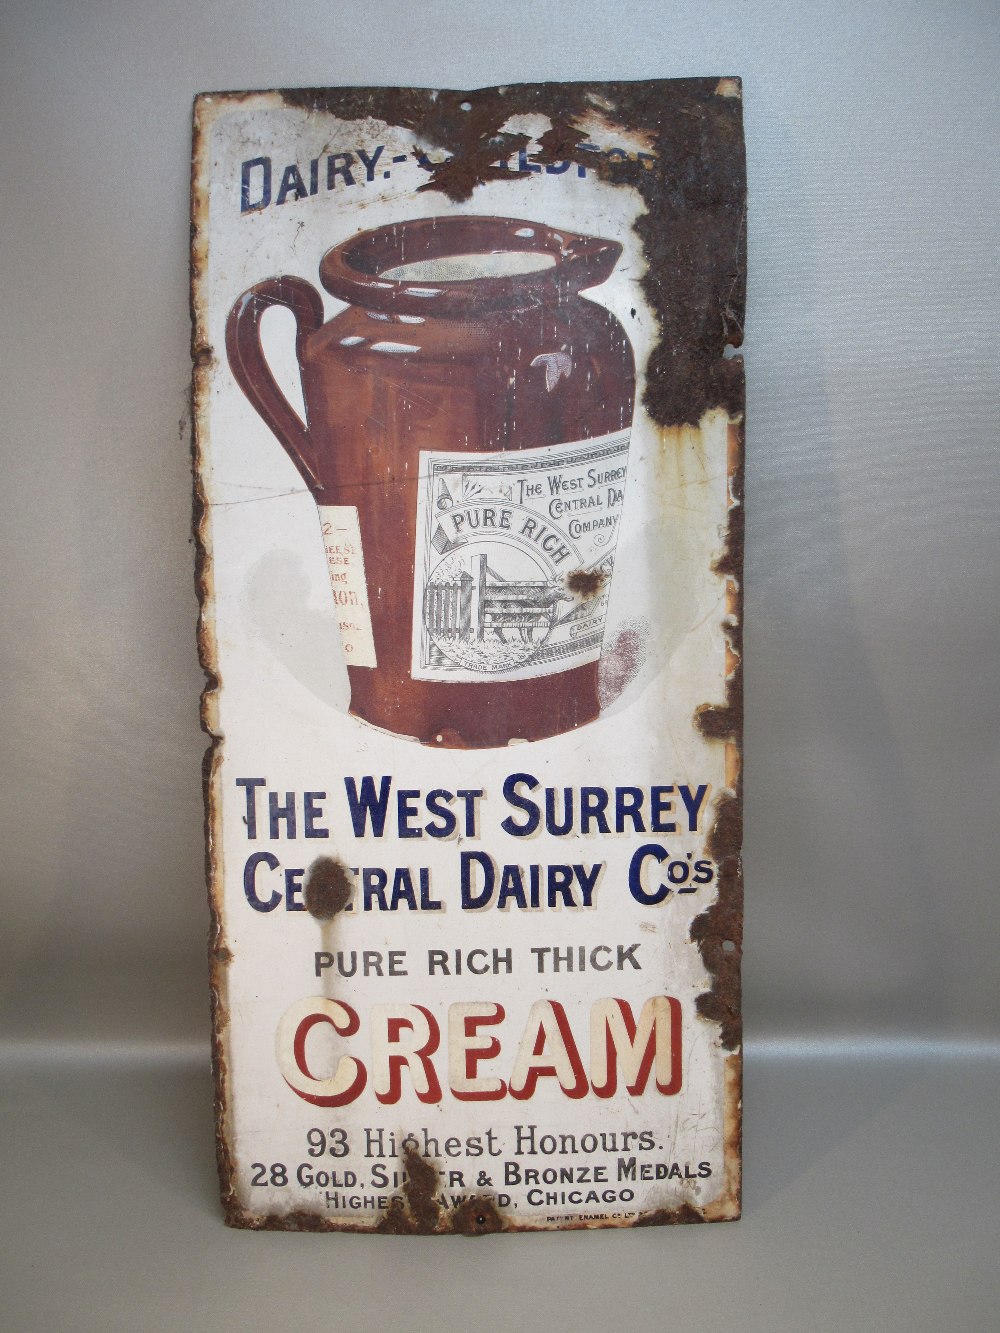 OF LOCAL INTEREST, WEST SURREY CENTRAL DAIRY Co's DAIRY - GUILDFORD PICTORIAL JUG ENAMELLED SIGN